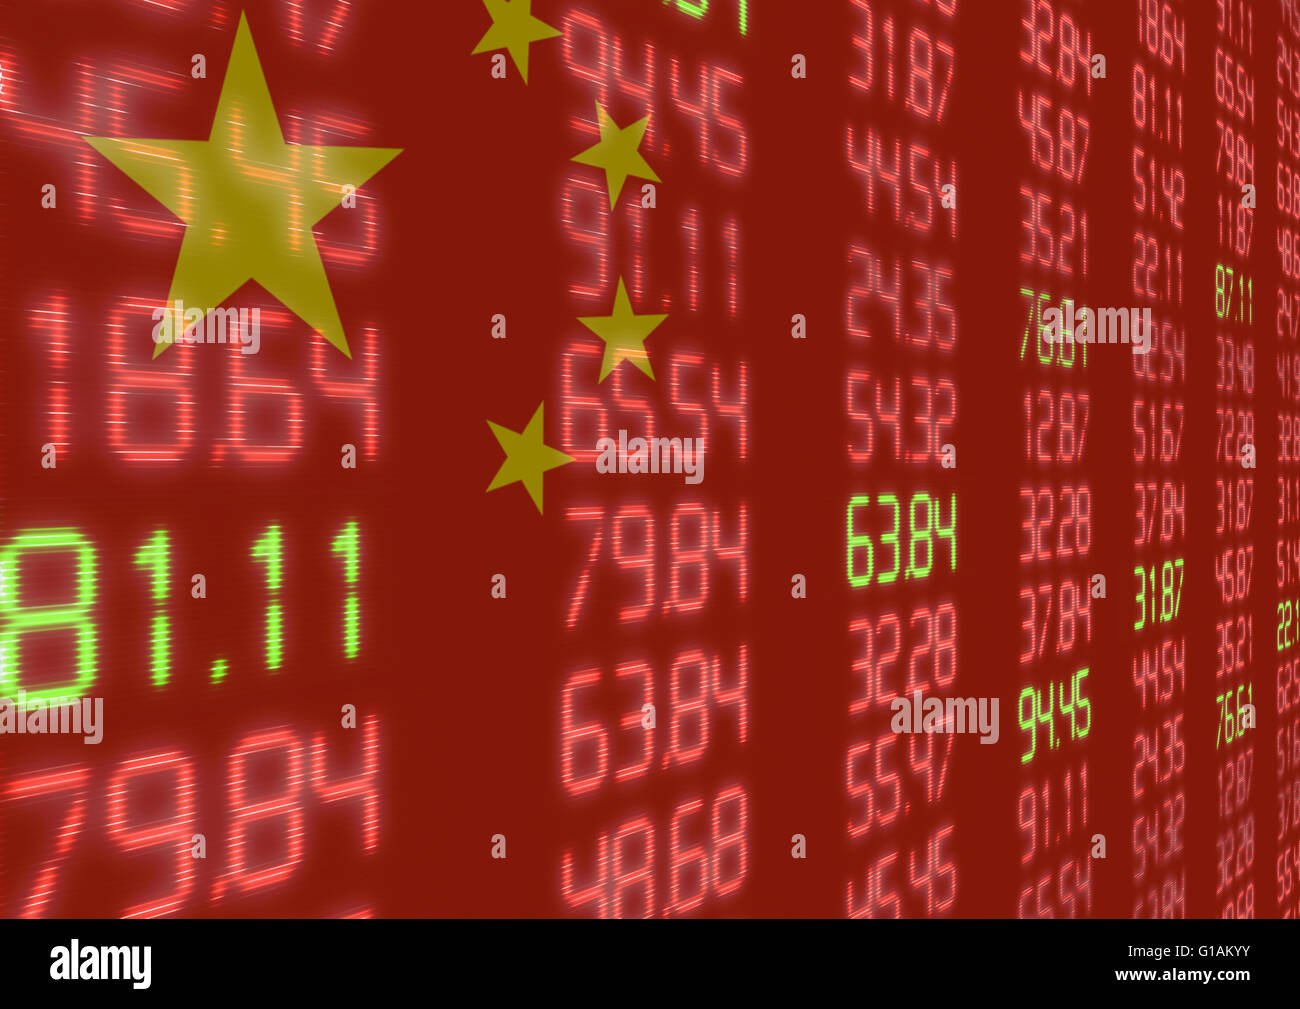 Chinese Stock Market - Red and Green Figures on Chinese Flag Stock Photo